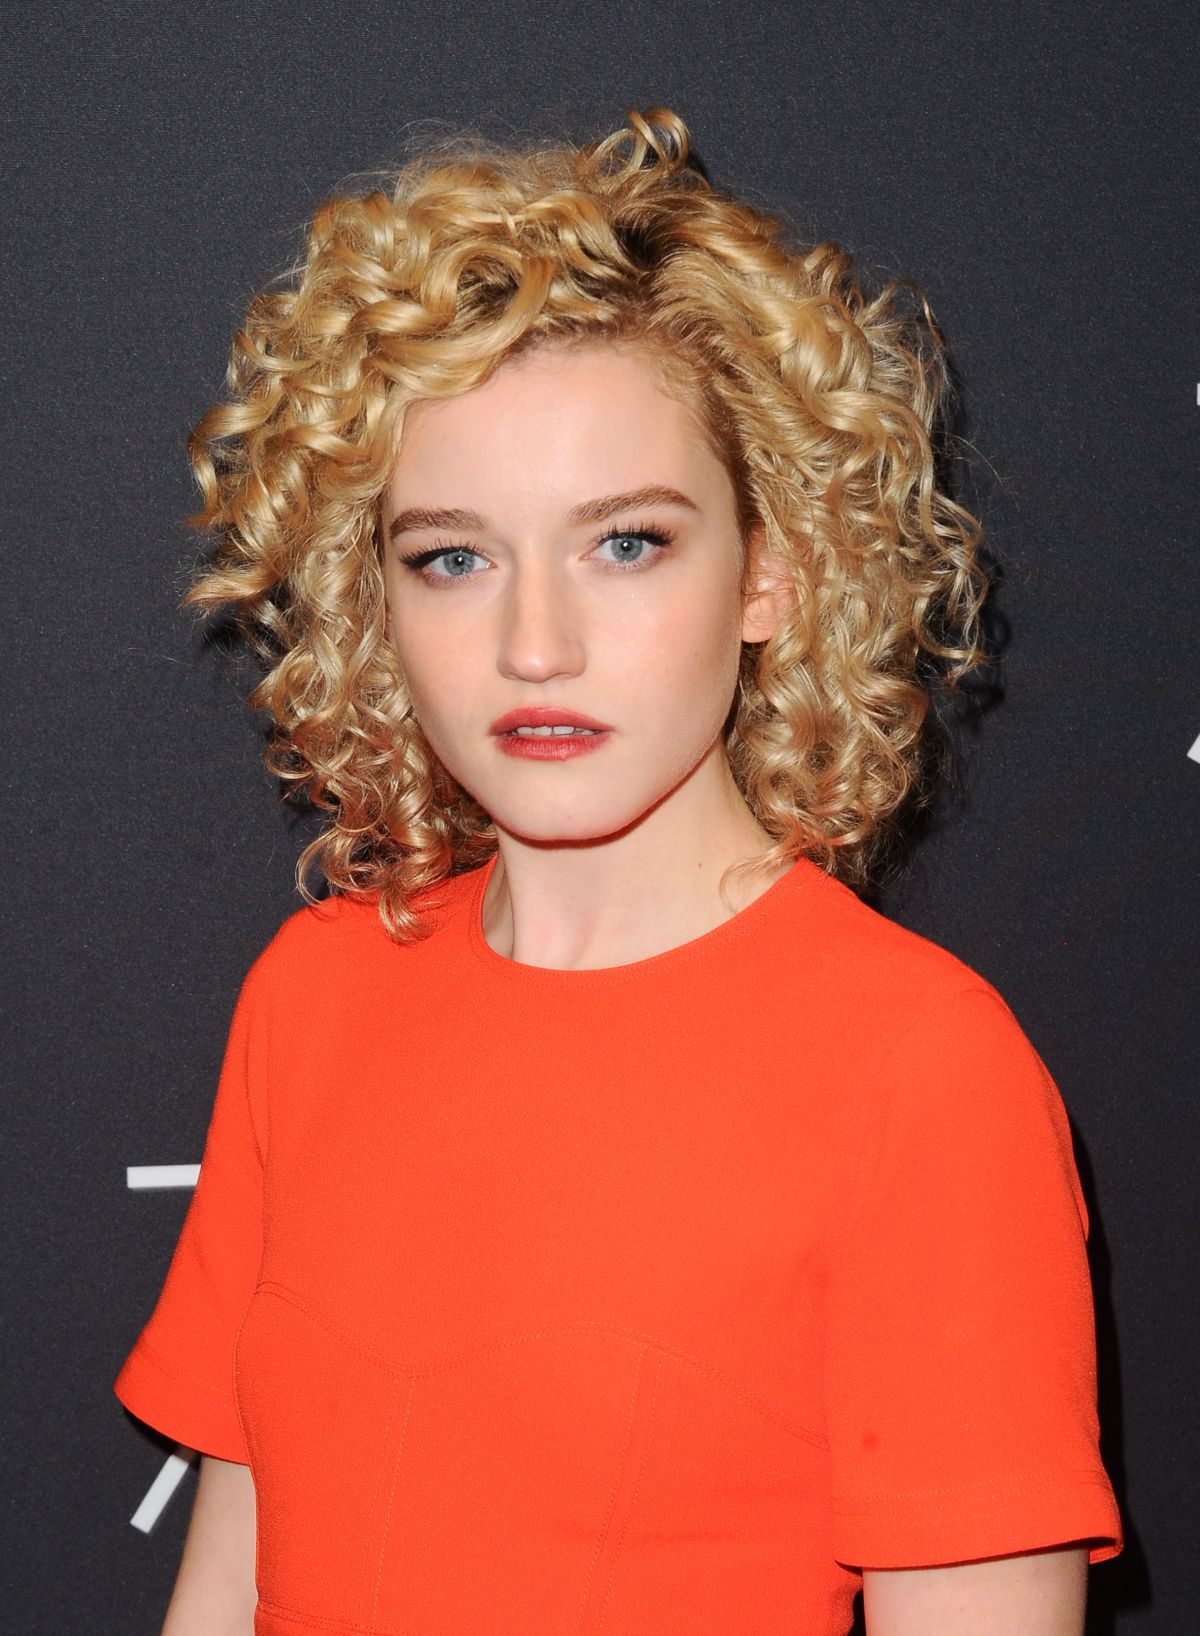 JULIA GARNER at HFPA & Instyle Celebrate 75th Anniversary of the Golden